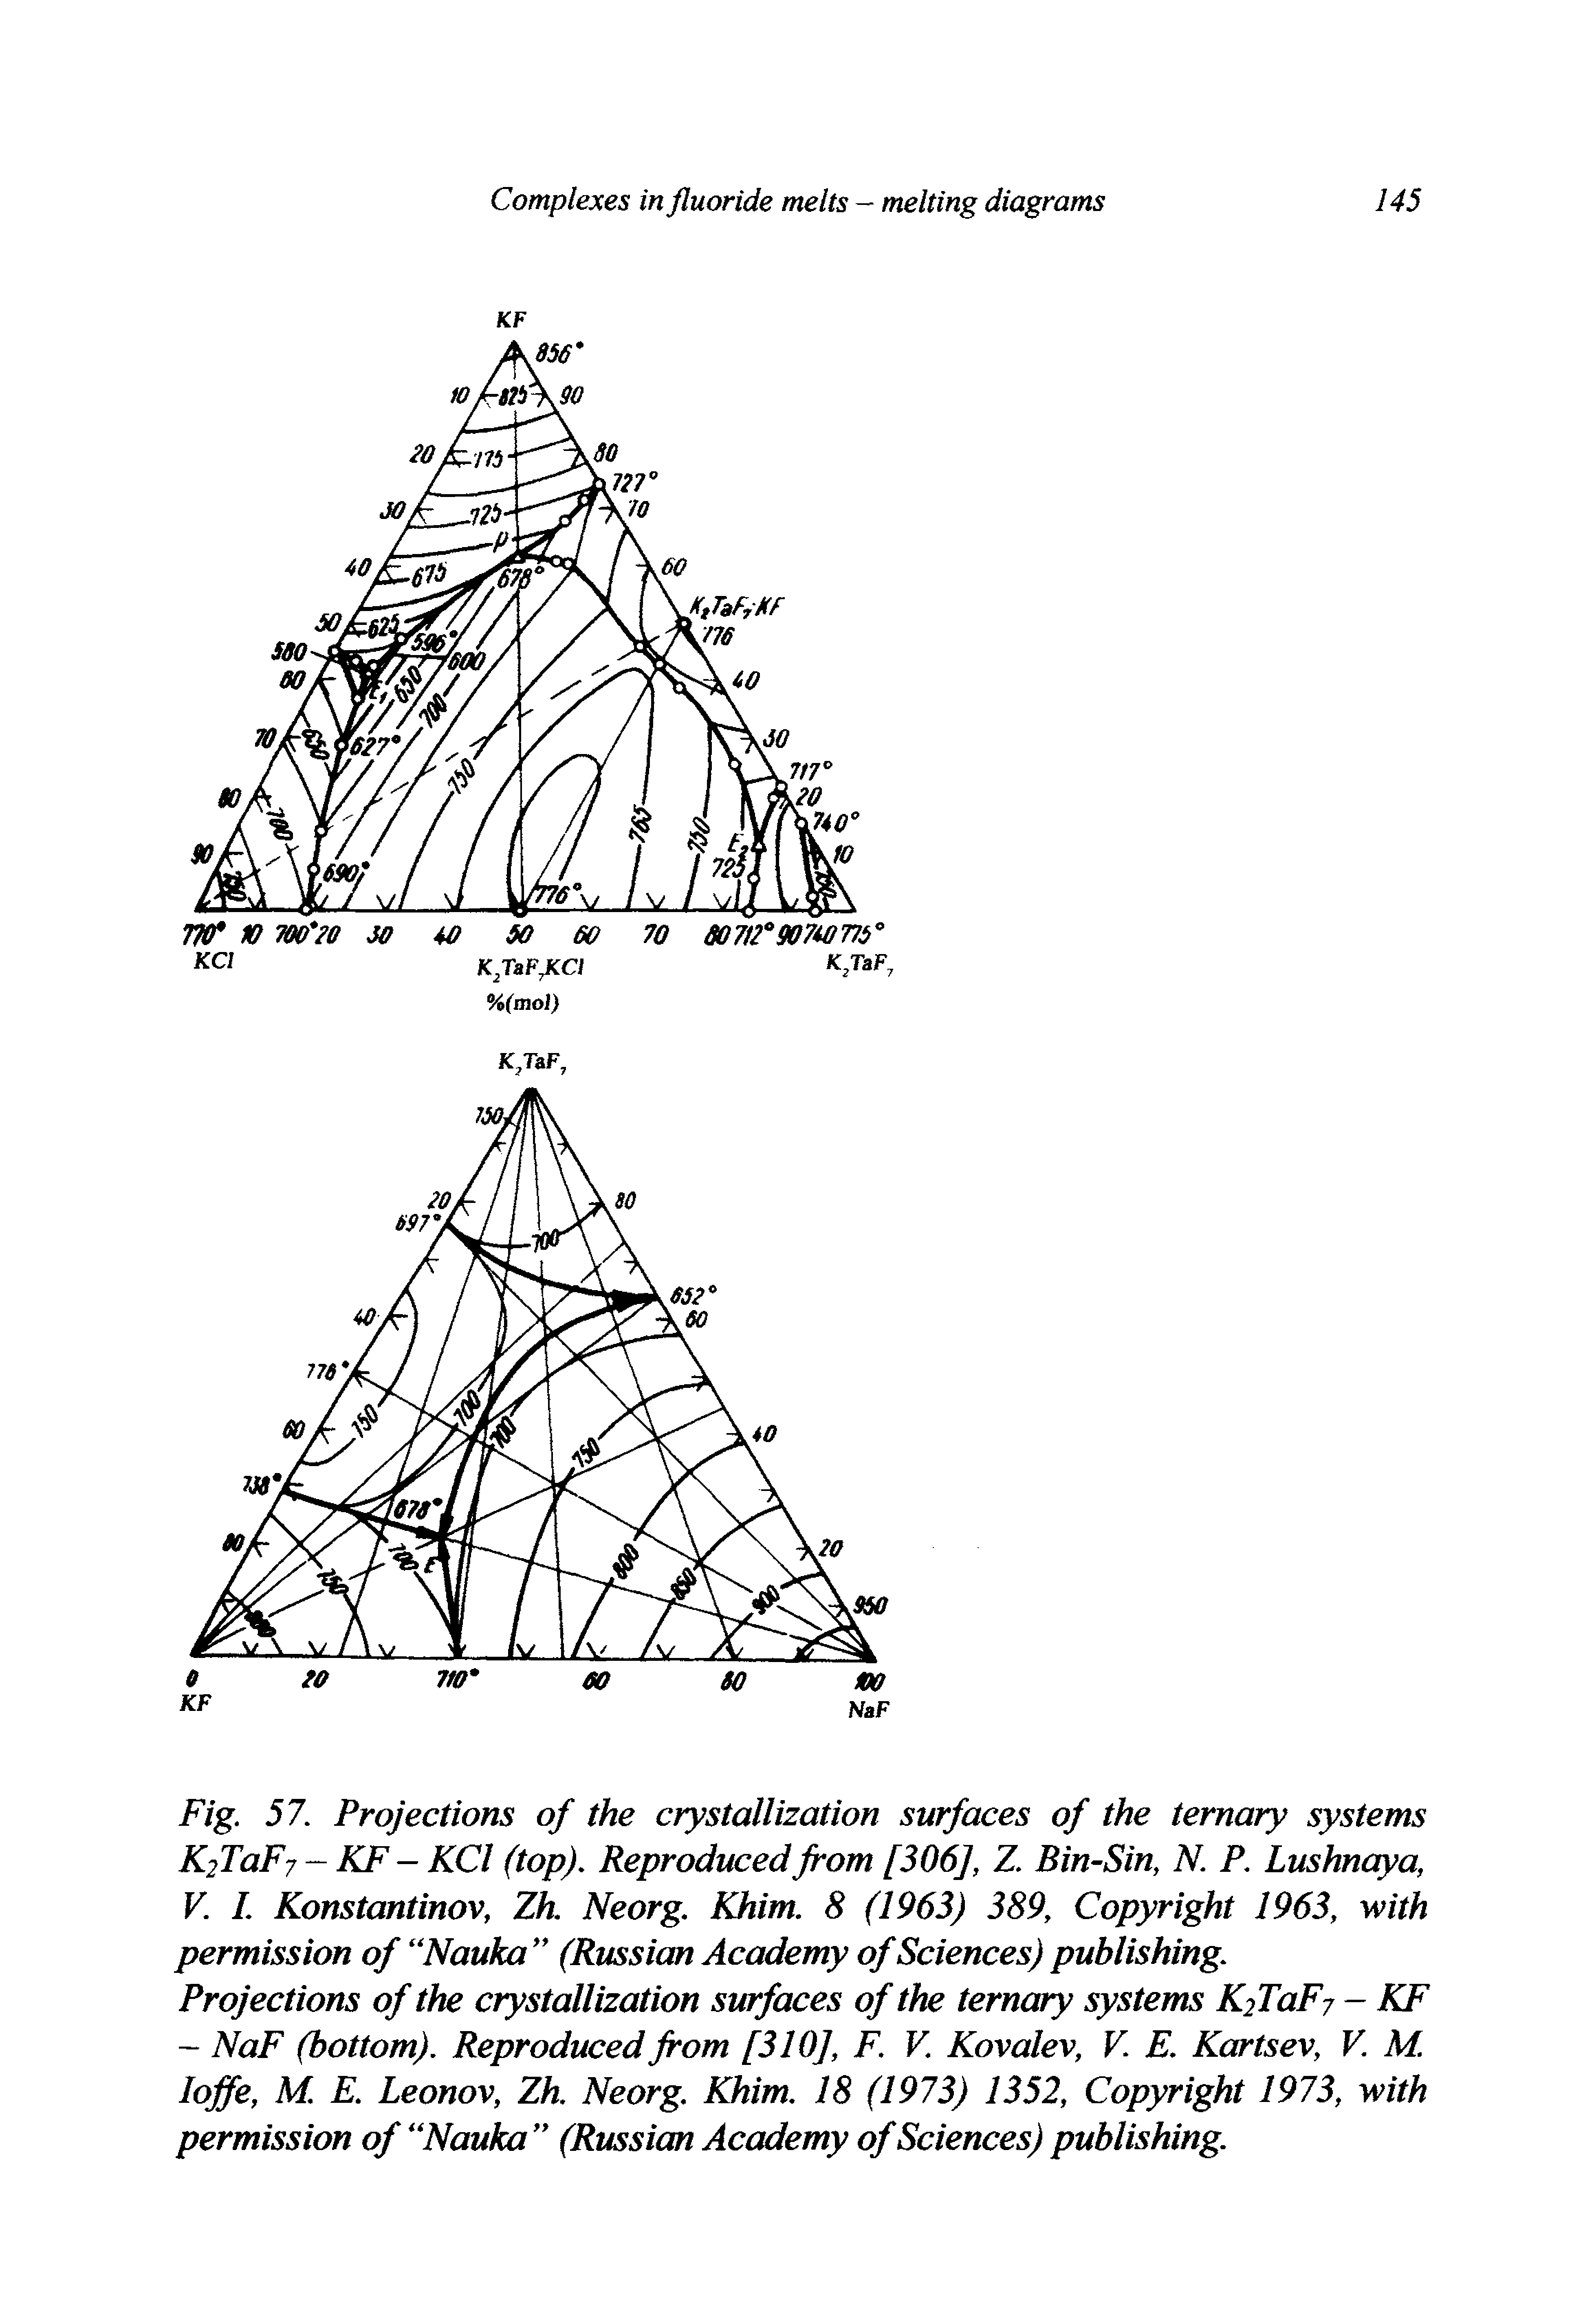 Fig. 57. Projections of the crystallization surfaces of the ternary systems K.2TaF7 - KF - KCl (top). Reproduced from [306], Z. Bin-Sin, N. P. Lushnaya, V. I. Konstantinov, Zh. Neorg. Khim. 8 (1963) 389, Copyright 1963, with permission of Nauka (Russian Academy of Sciences) publishing.